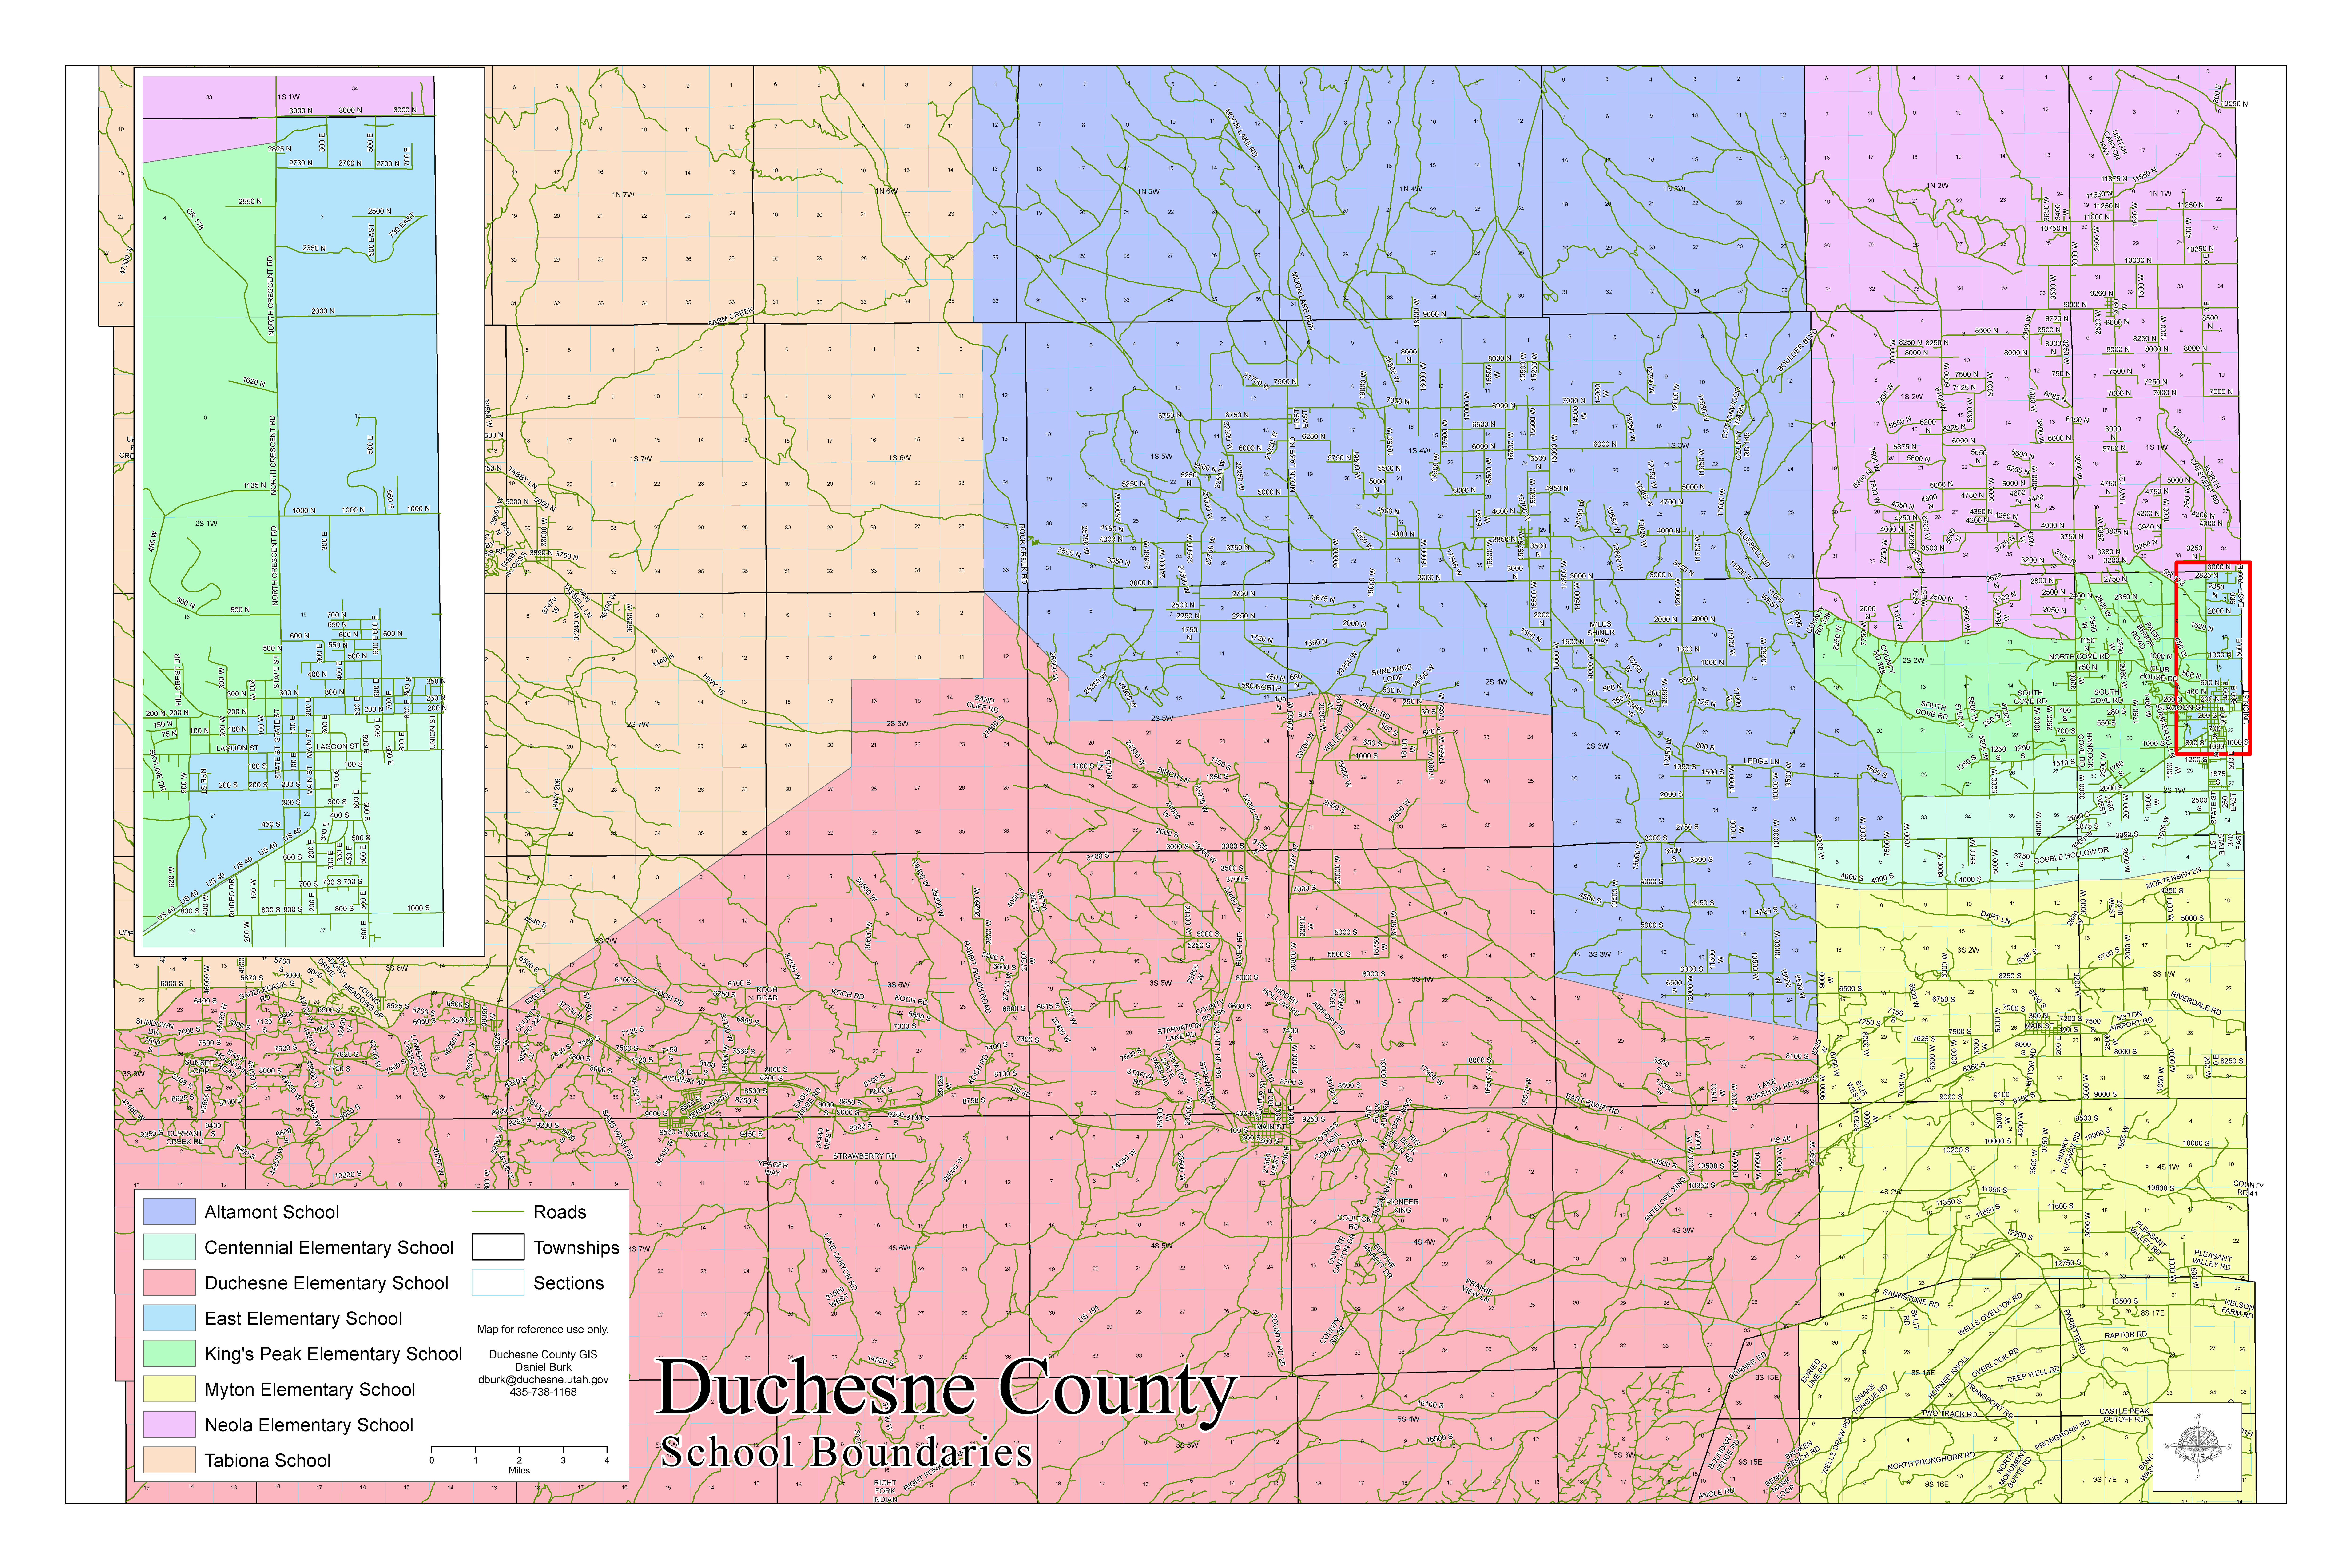 A map of Duchesne County School District Boundaries